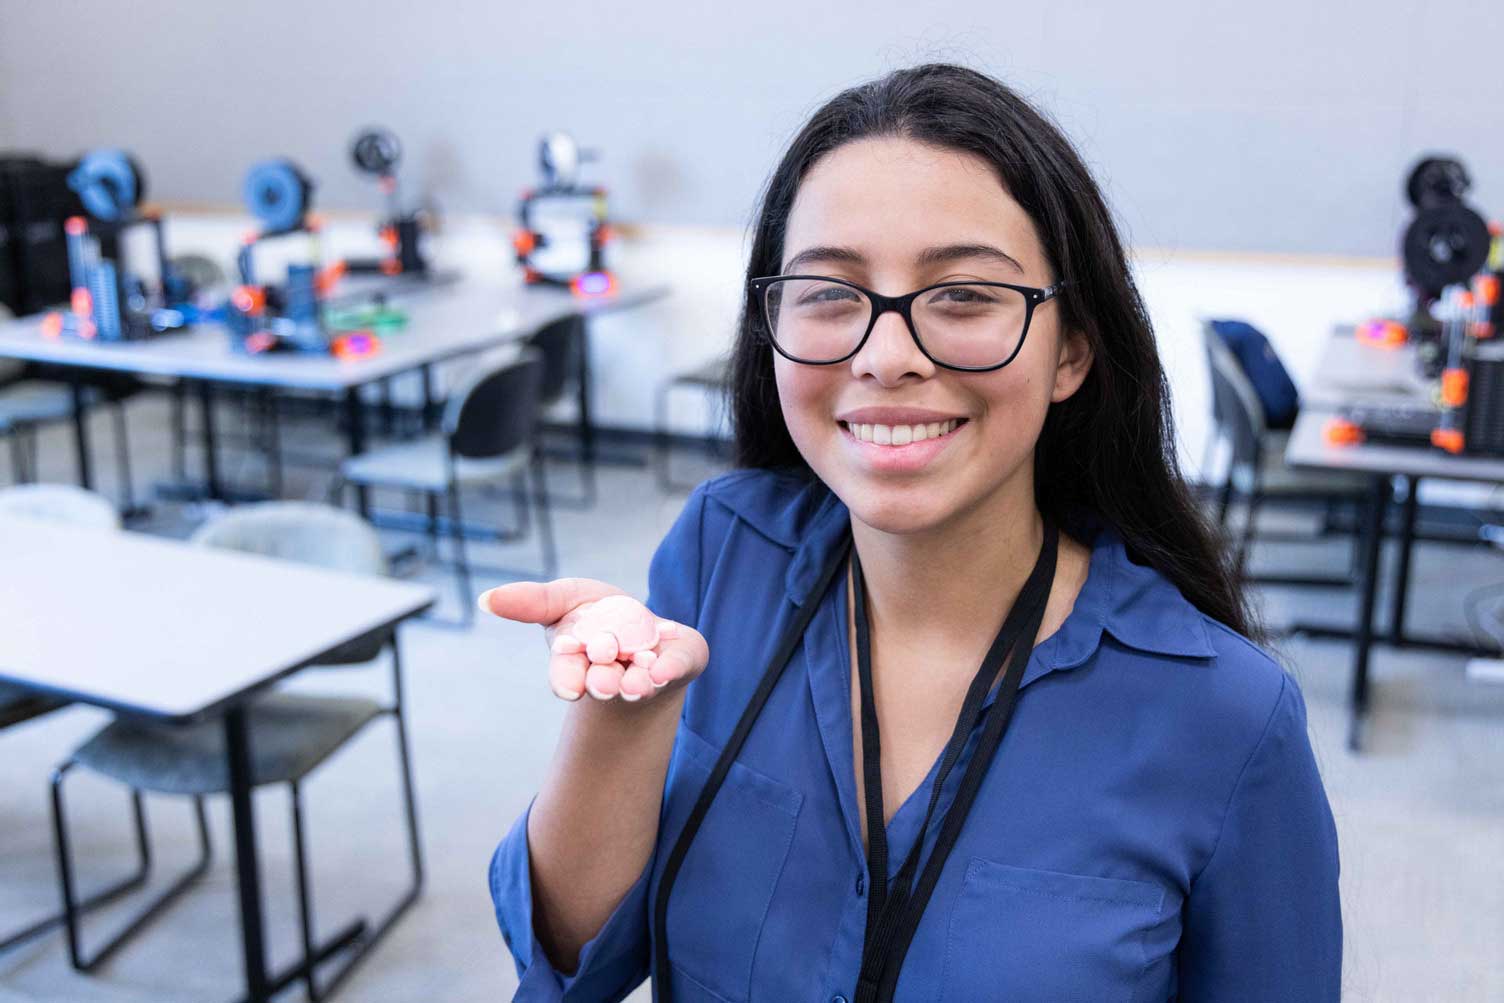 A student holds a 3D printed object during the Joint Science and Technology Institute, Aberdeen Proving Ground